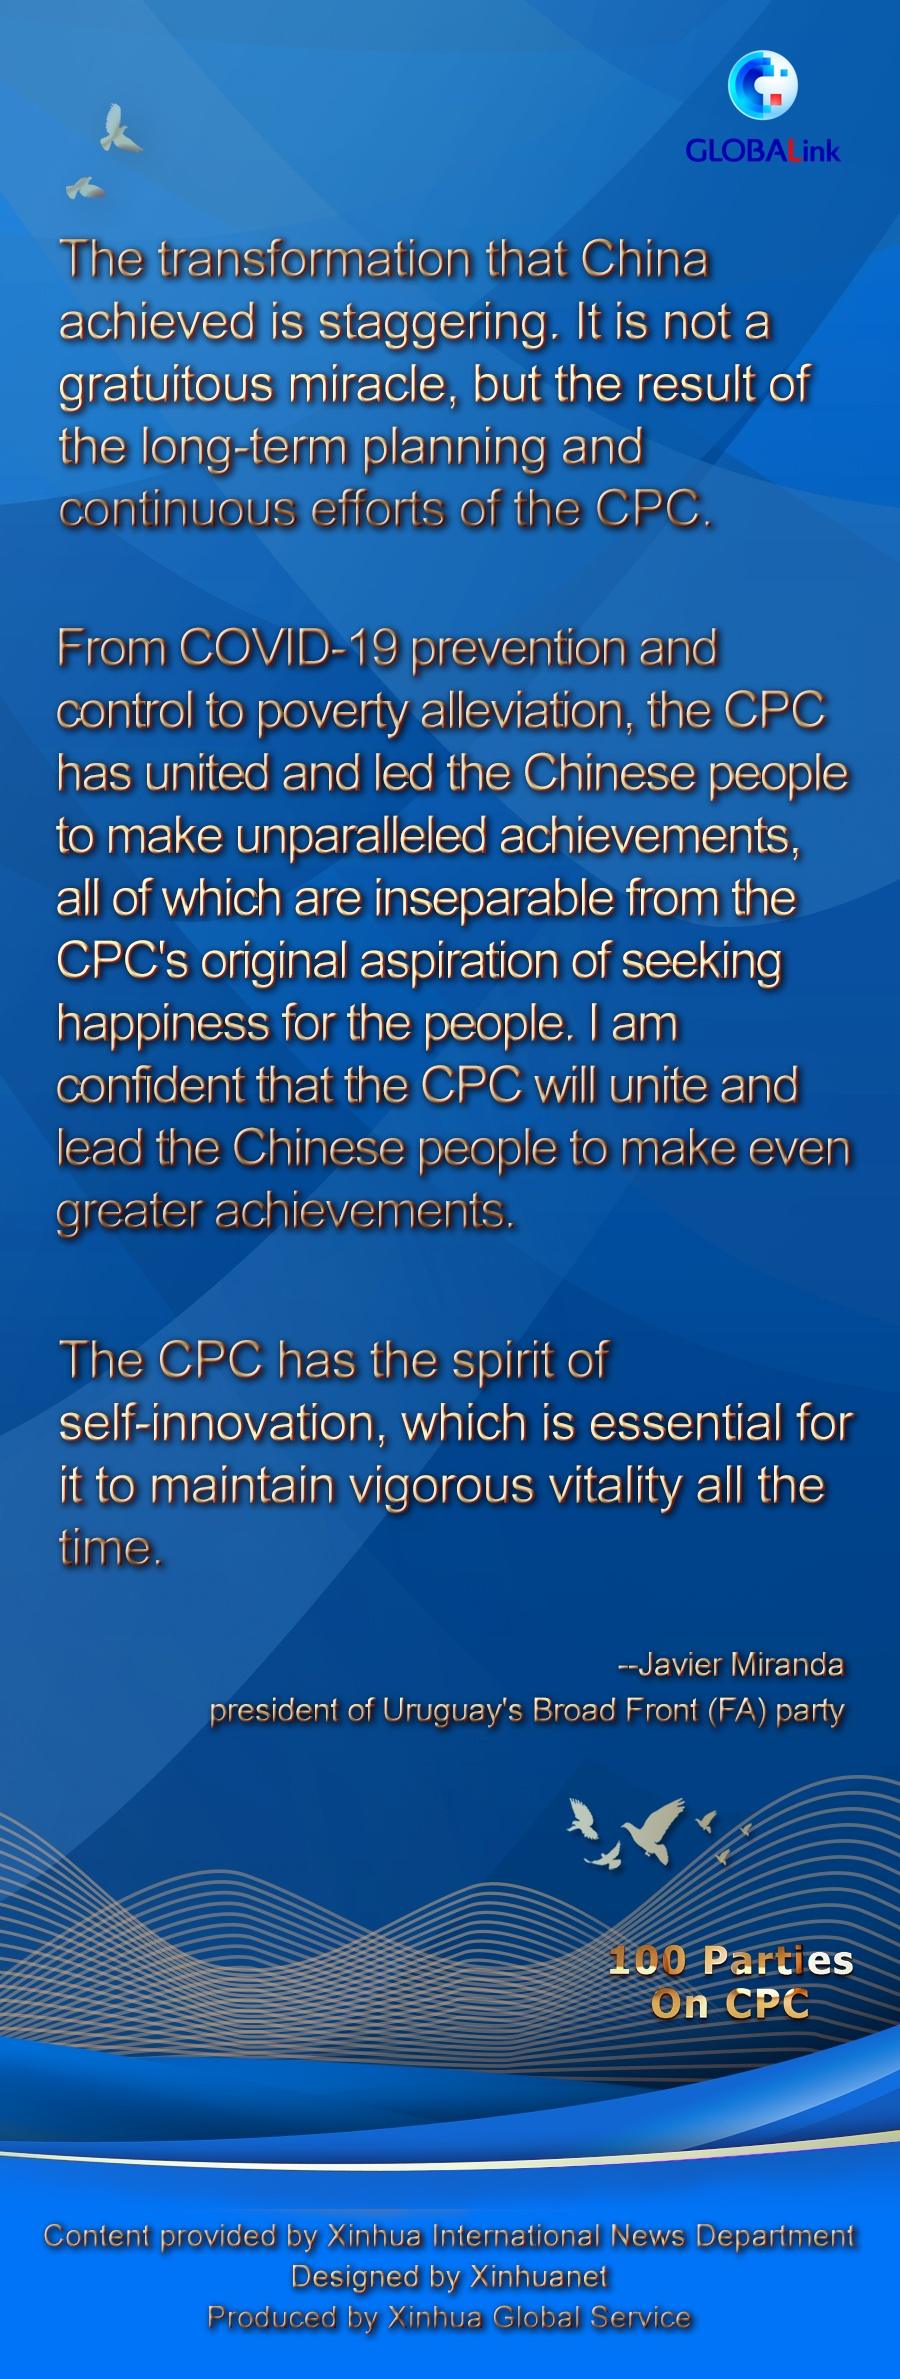 Interview: CPC elevates quality of life in China, says head of Uruguay's Broad Front party